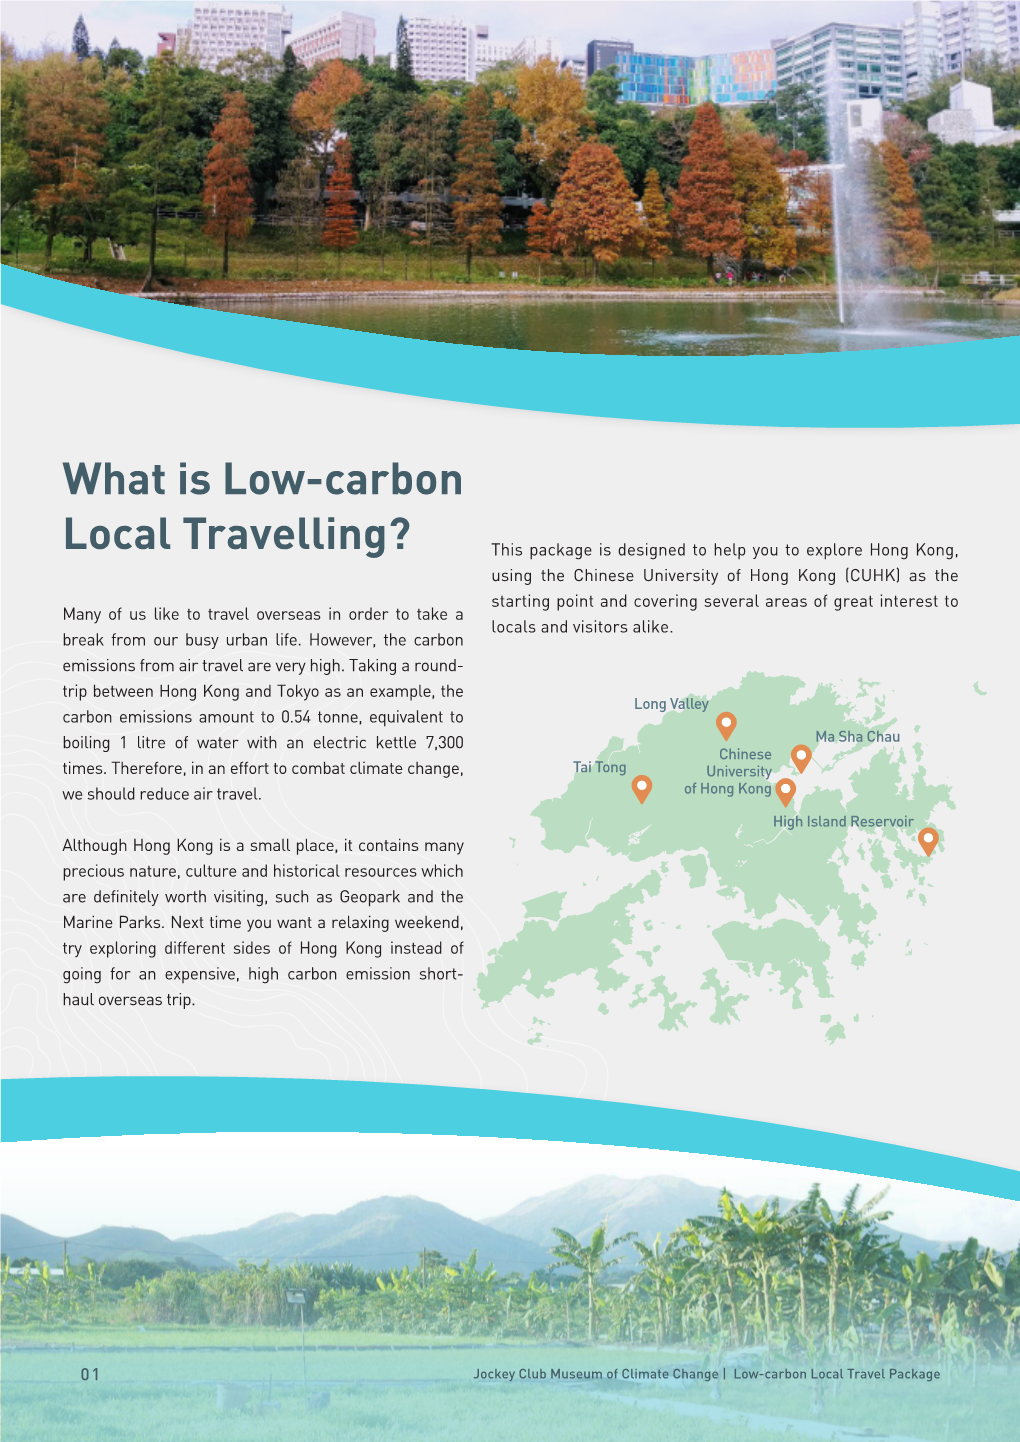 What Is Low-Carbon Local Travelling?